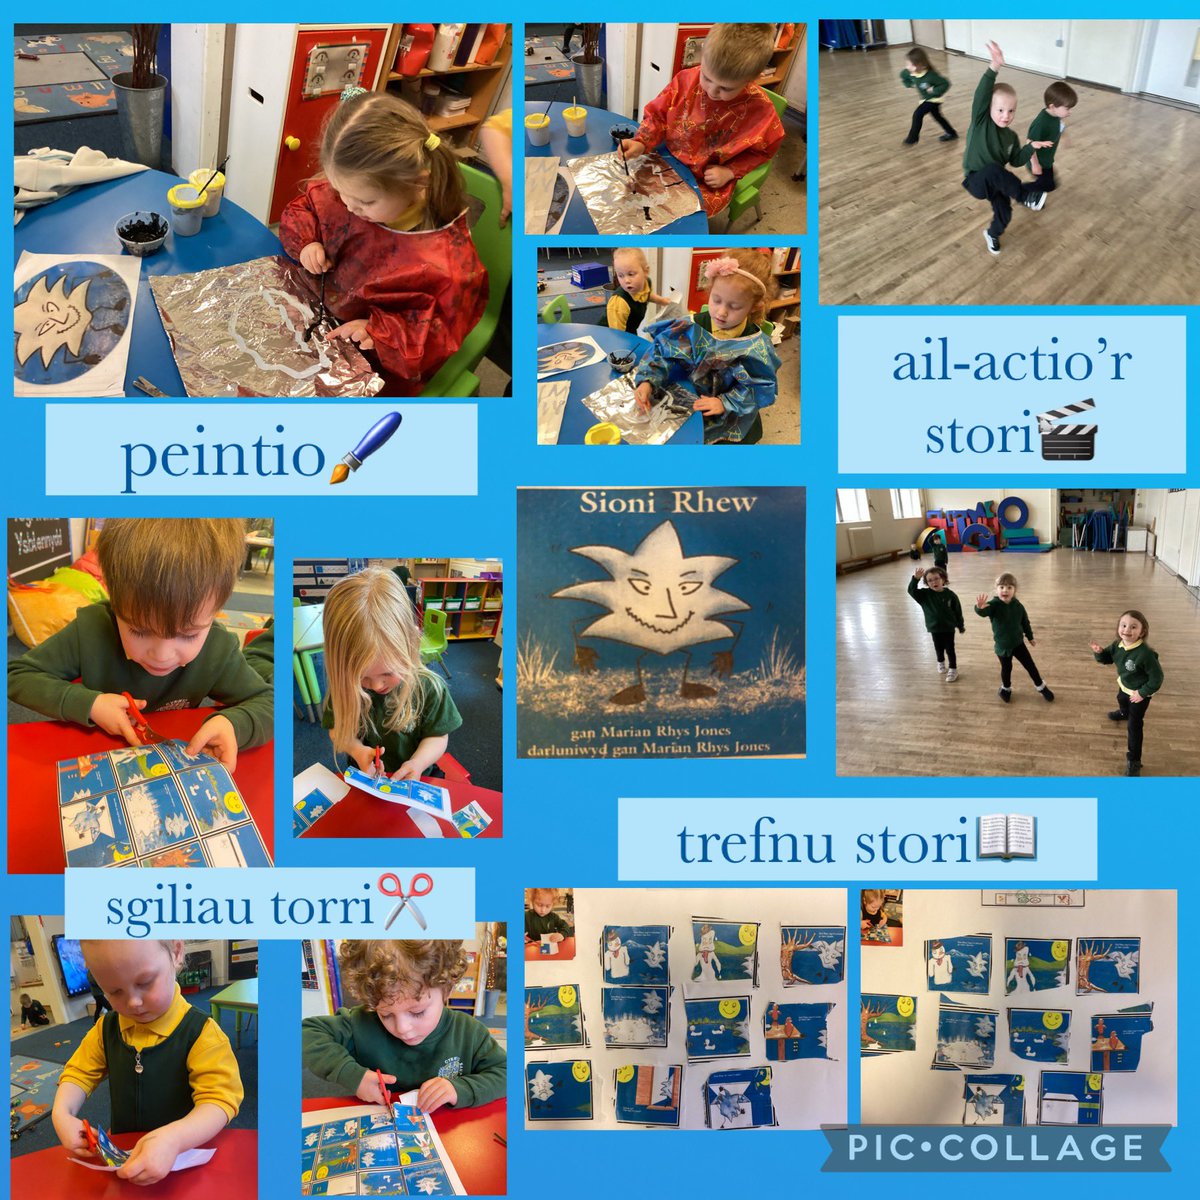 Wythnos o weithgareddau diddorol am stori Sioni Rhew! ❄️🥶❄️🥶❄️🥶❄️🥶❄️🥶❄️🥶❄️🥶❄️🥶❄️🥶❄️🥶 A week of interesting activities about the story of Jack Frost!